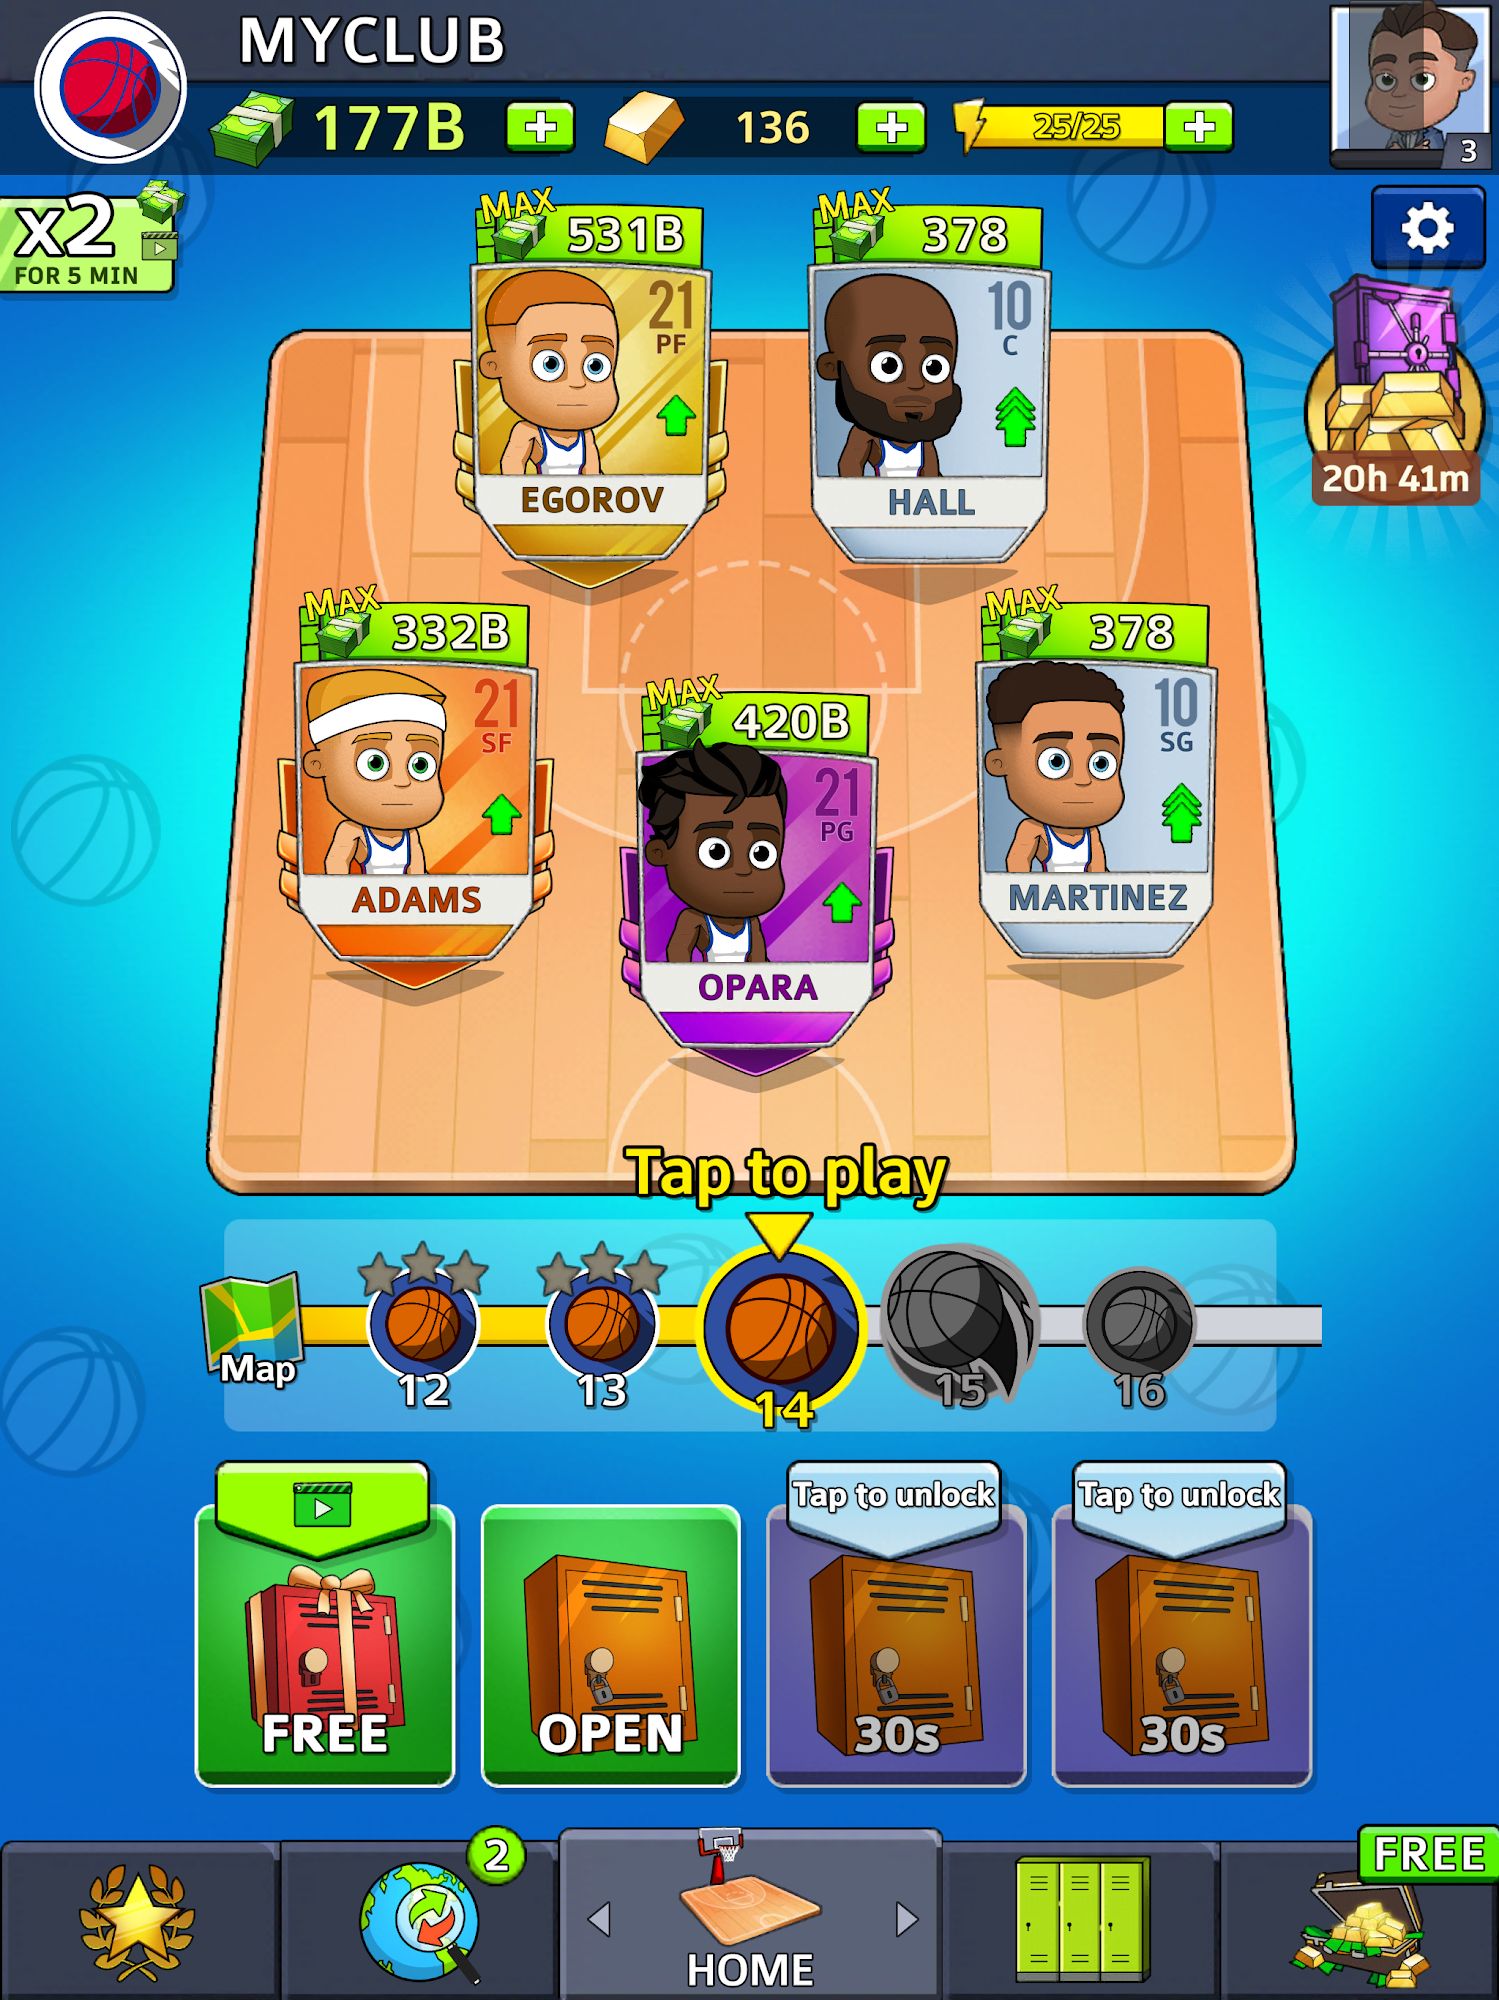 Descargar Idle Five - Be a millionaire basketball tycoon gratis para Android.